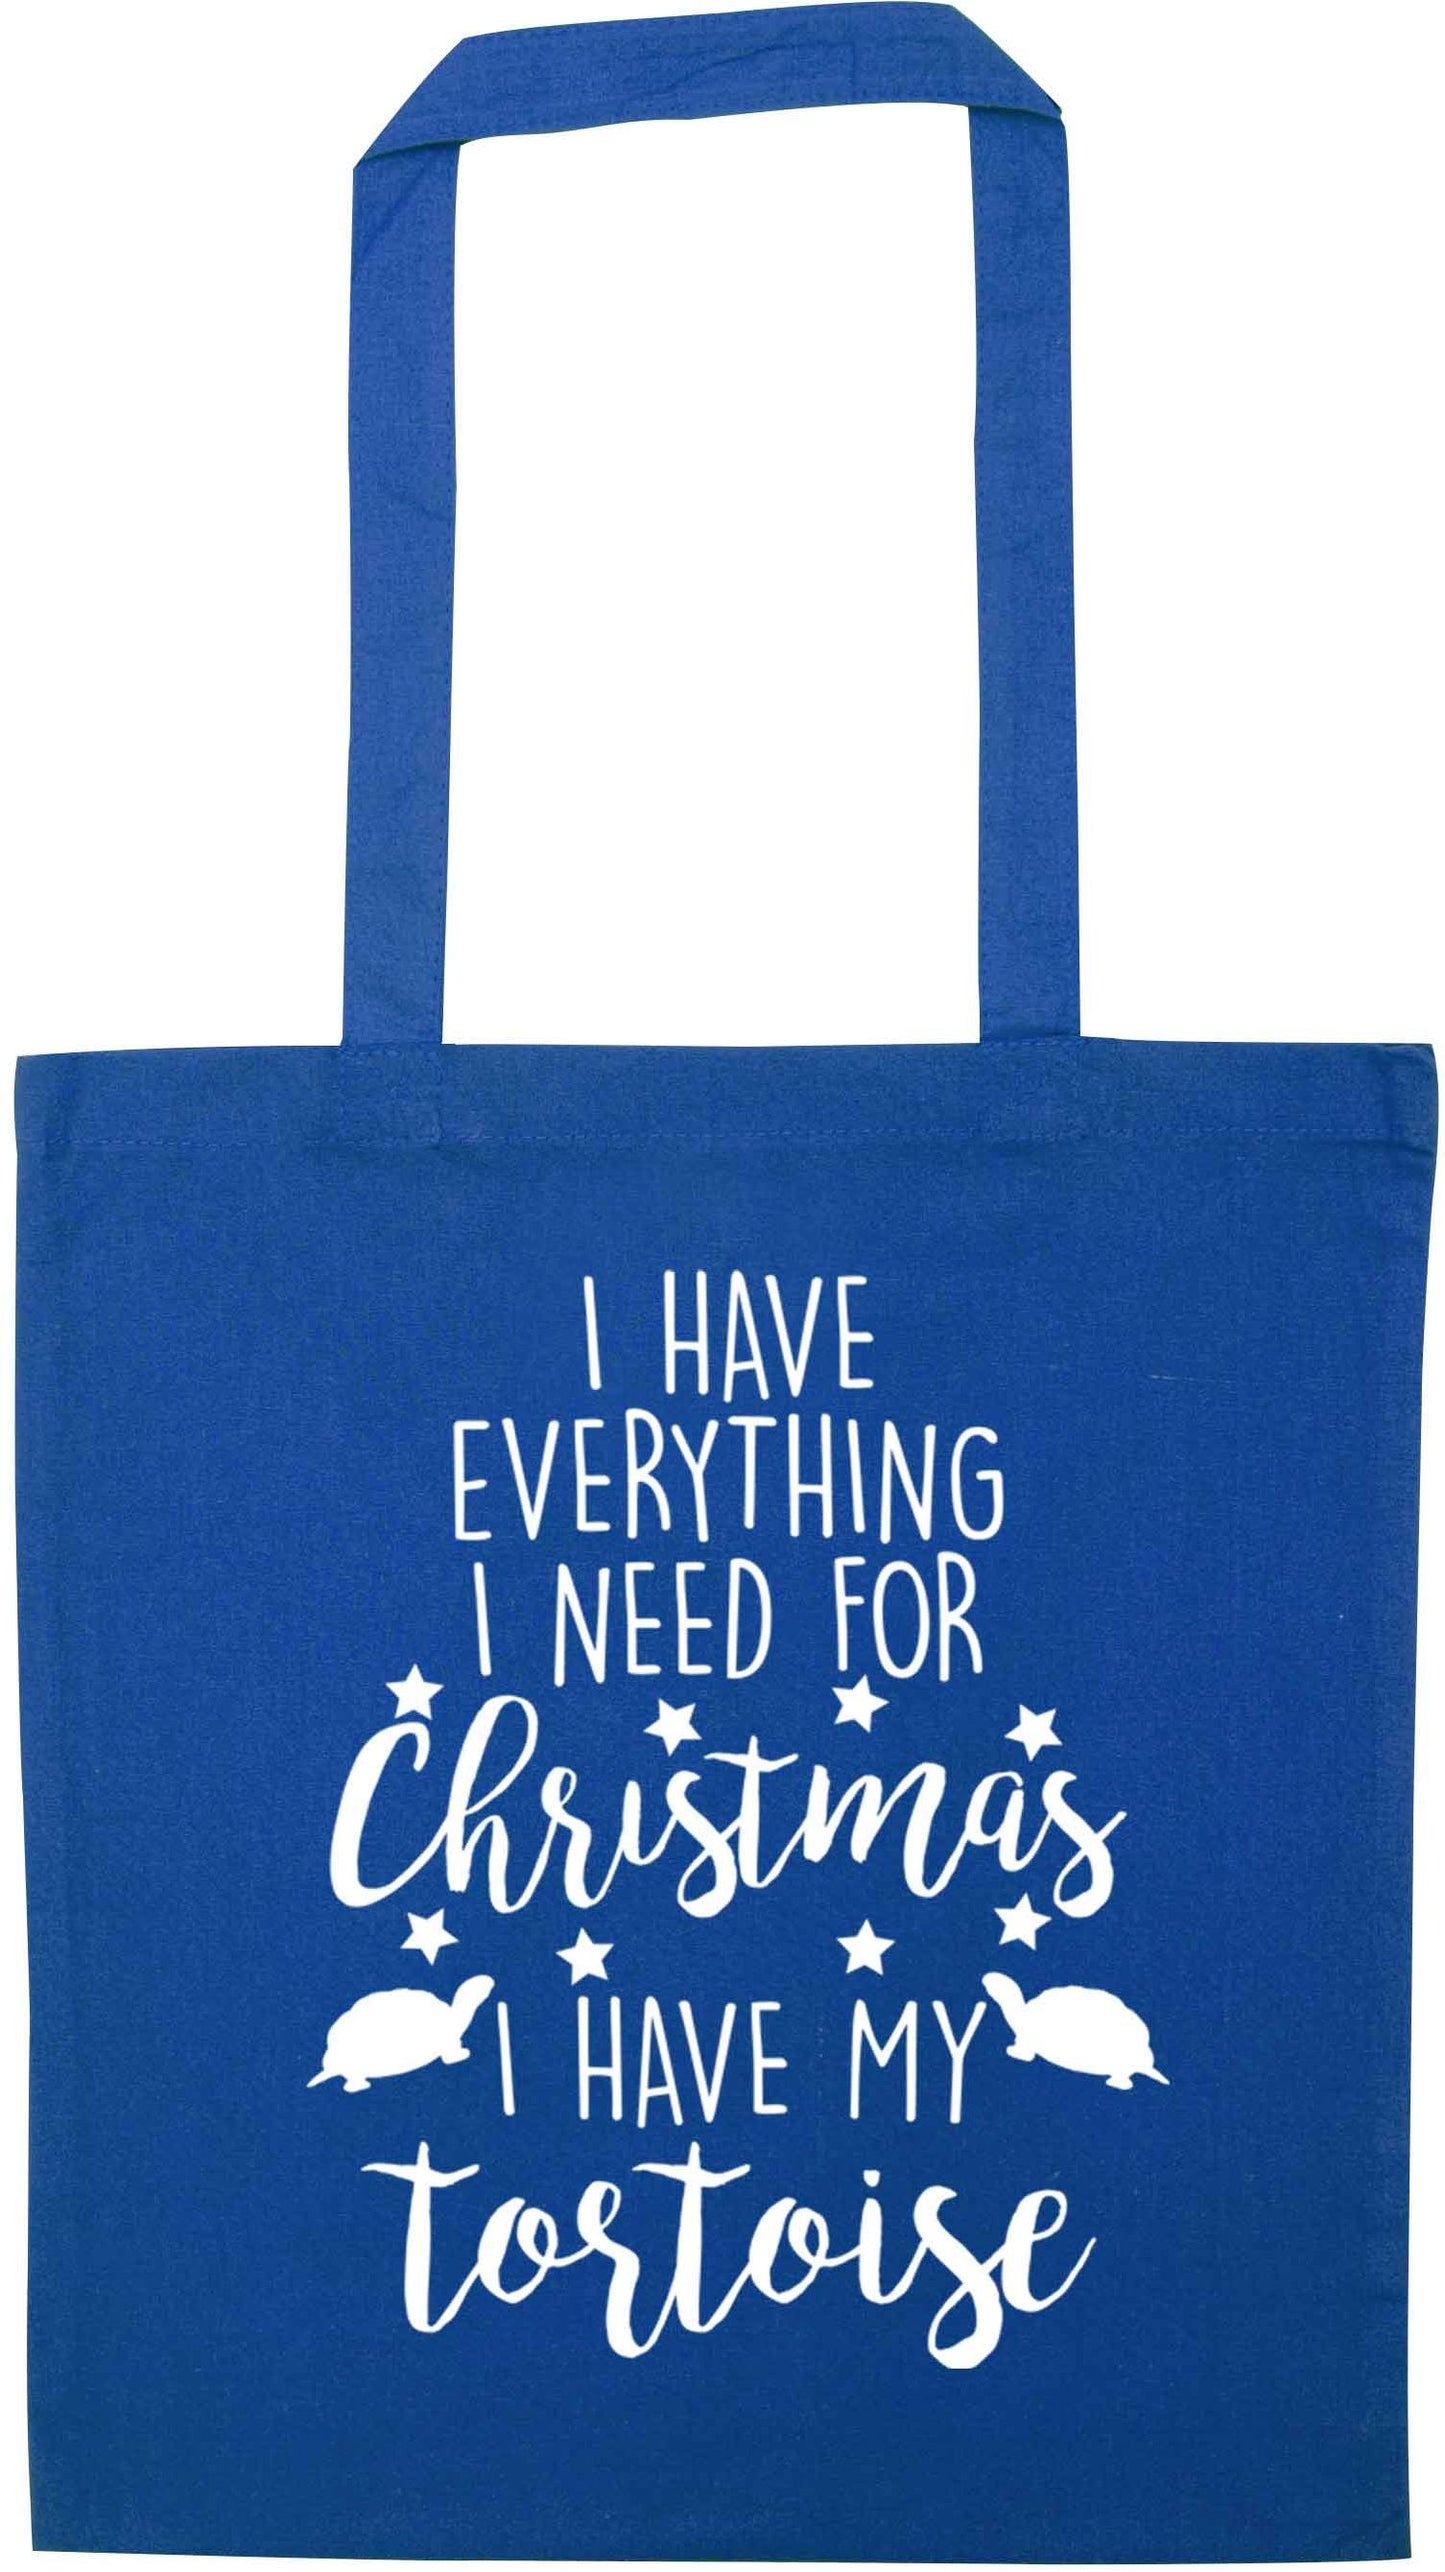 I have everything I need for Christmas I have my tortoise blue tote bag